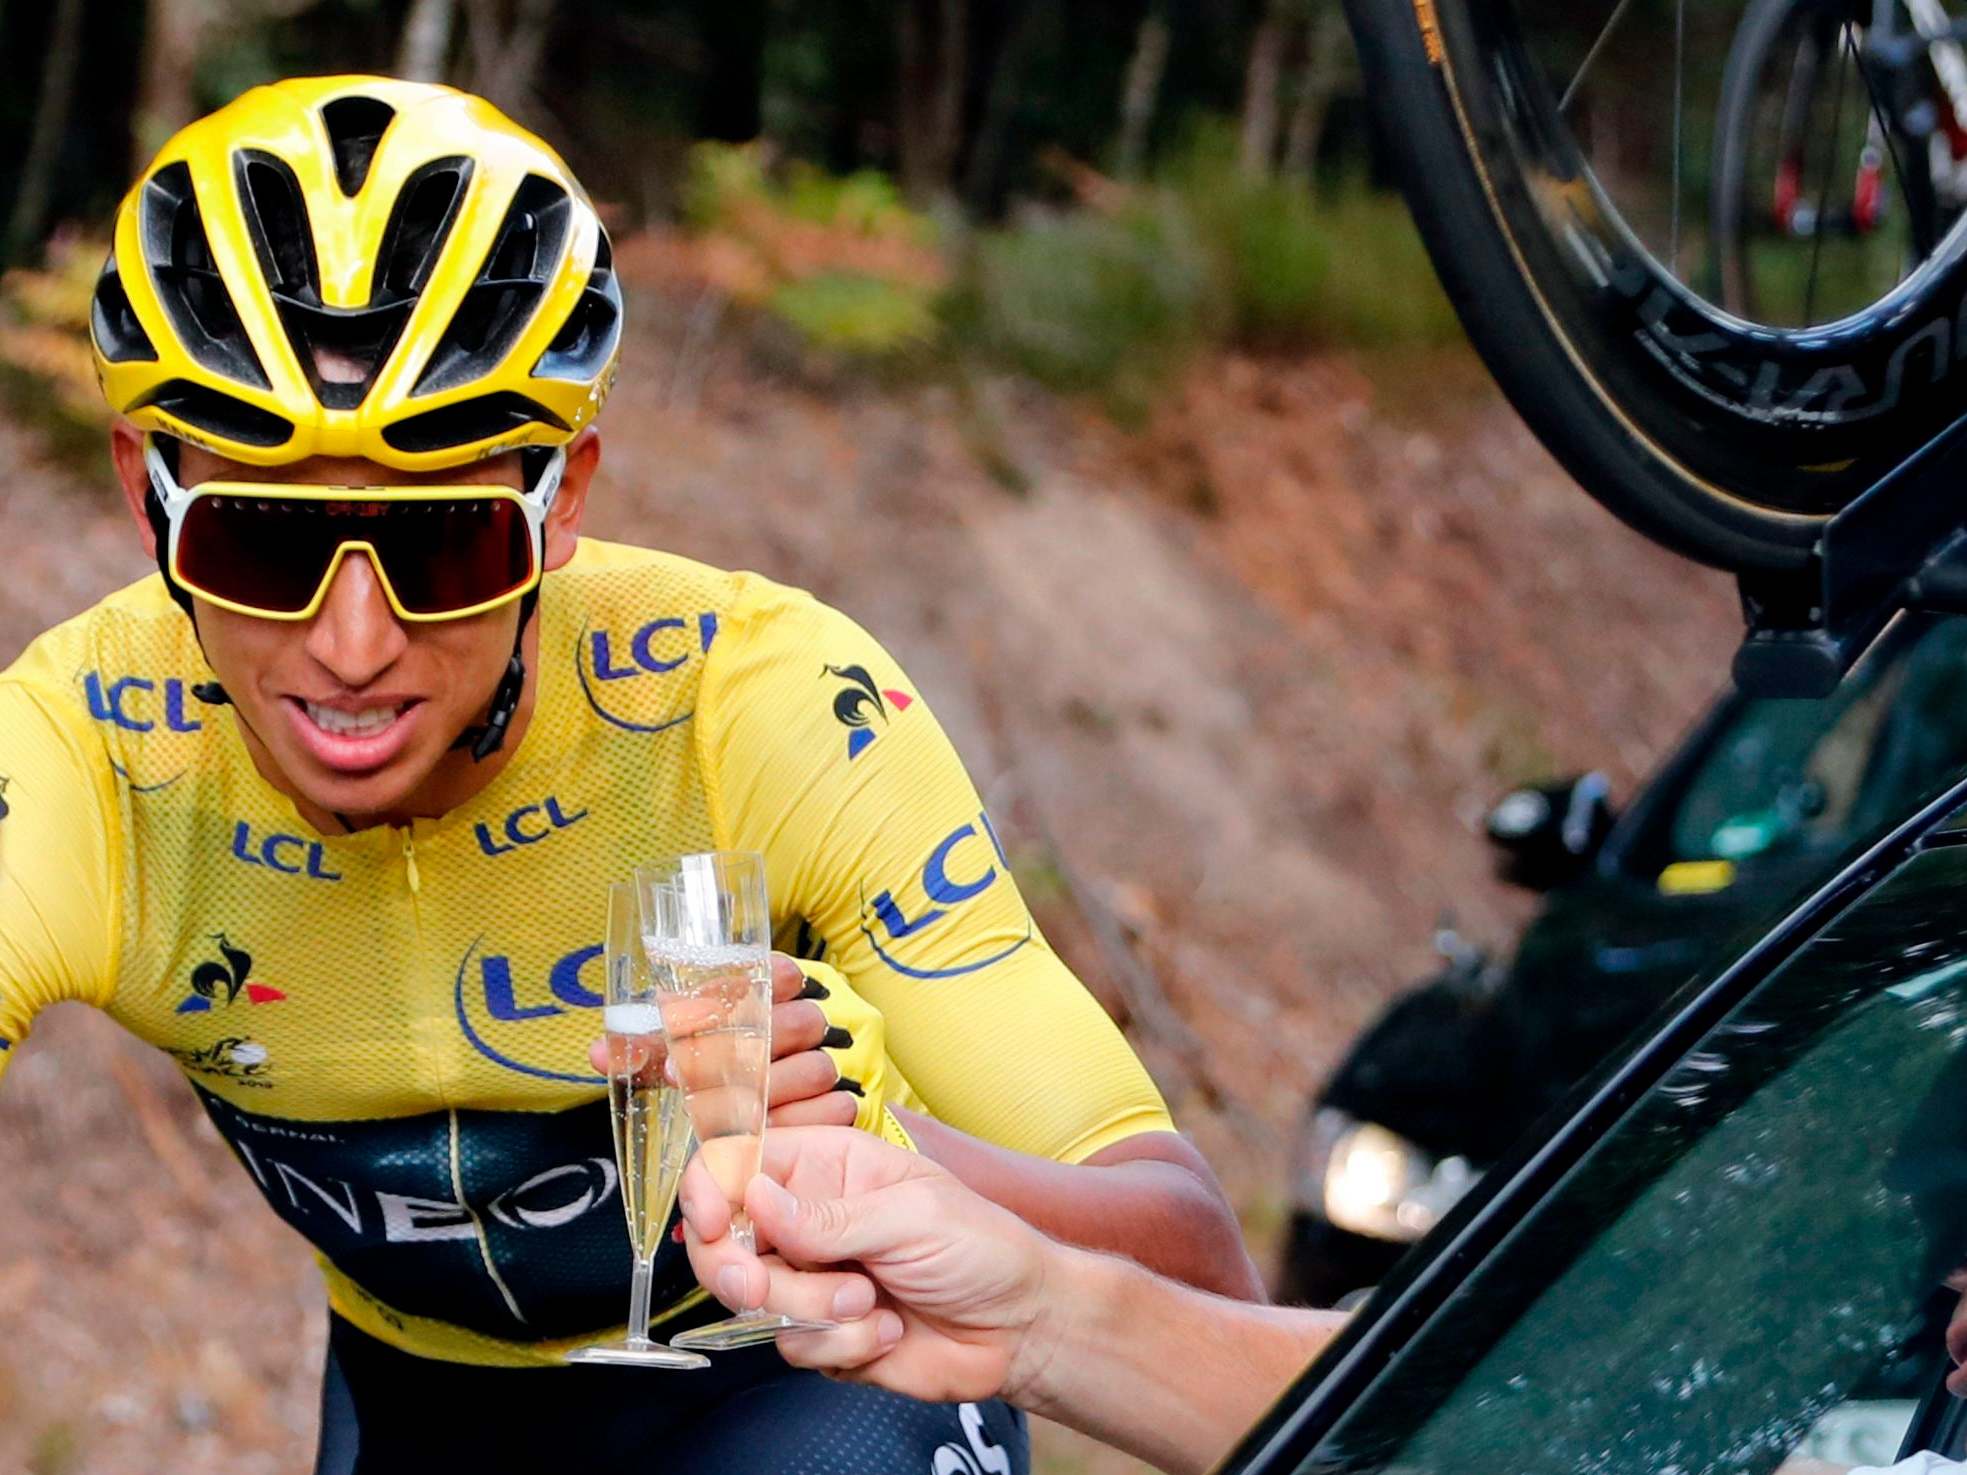 Egan Bernal gives a cheers to Dave Brailsford